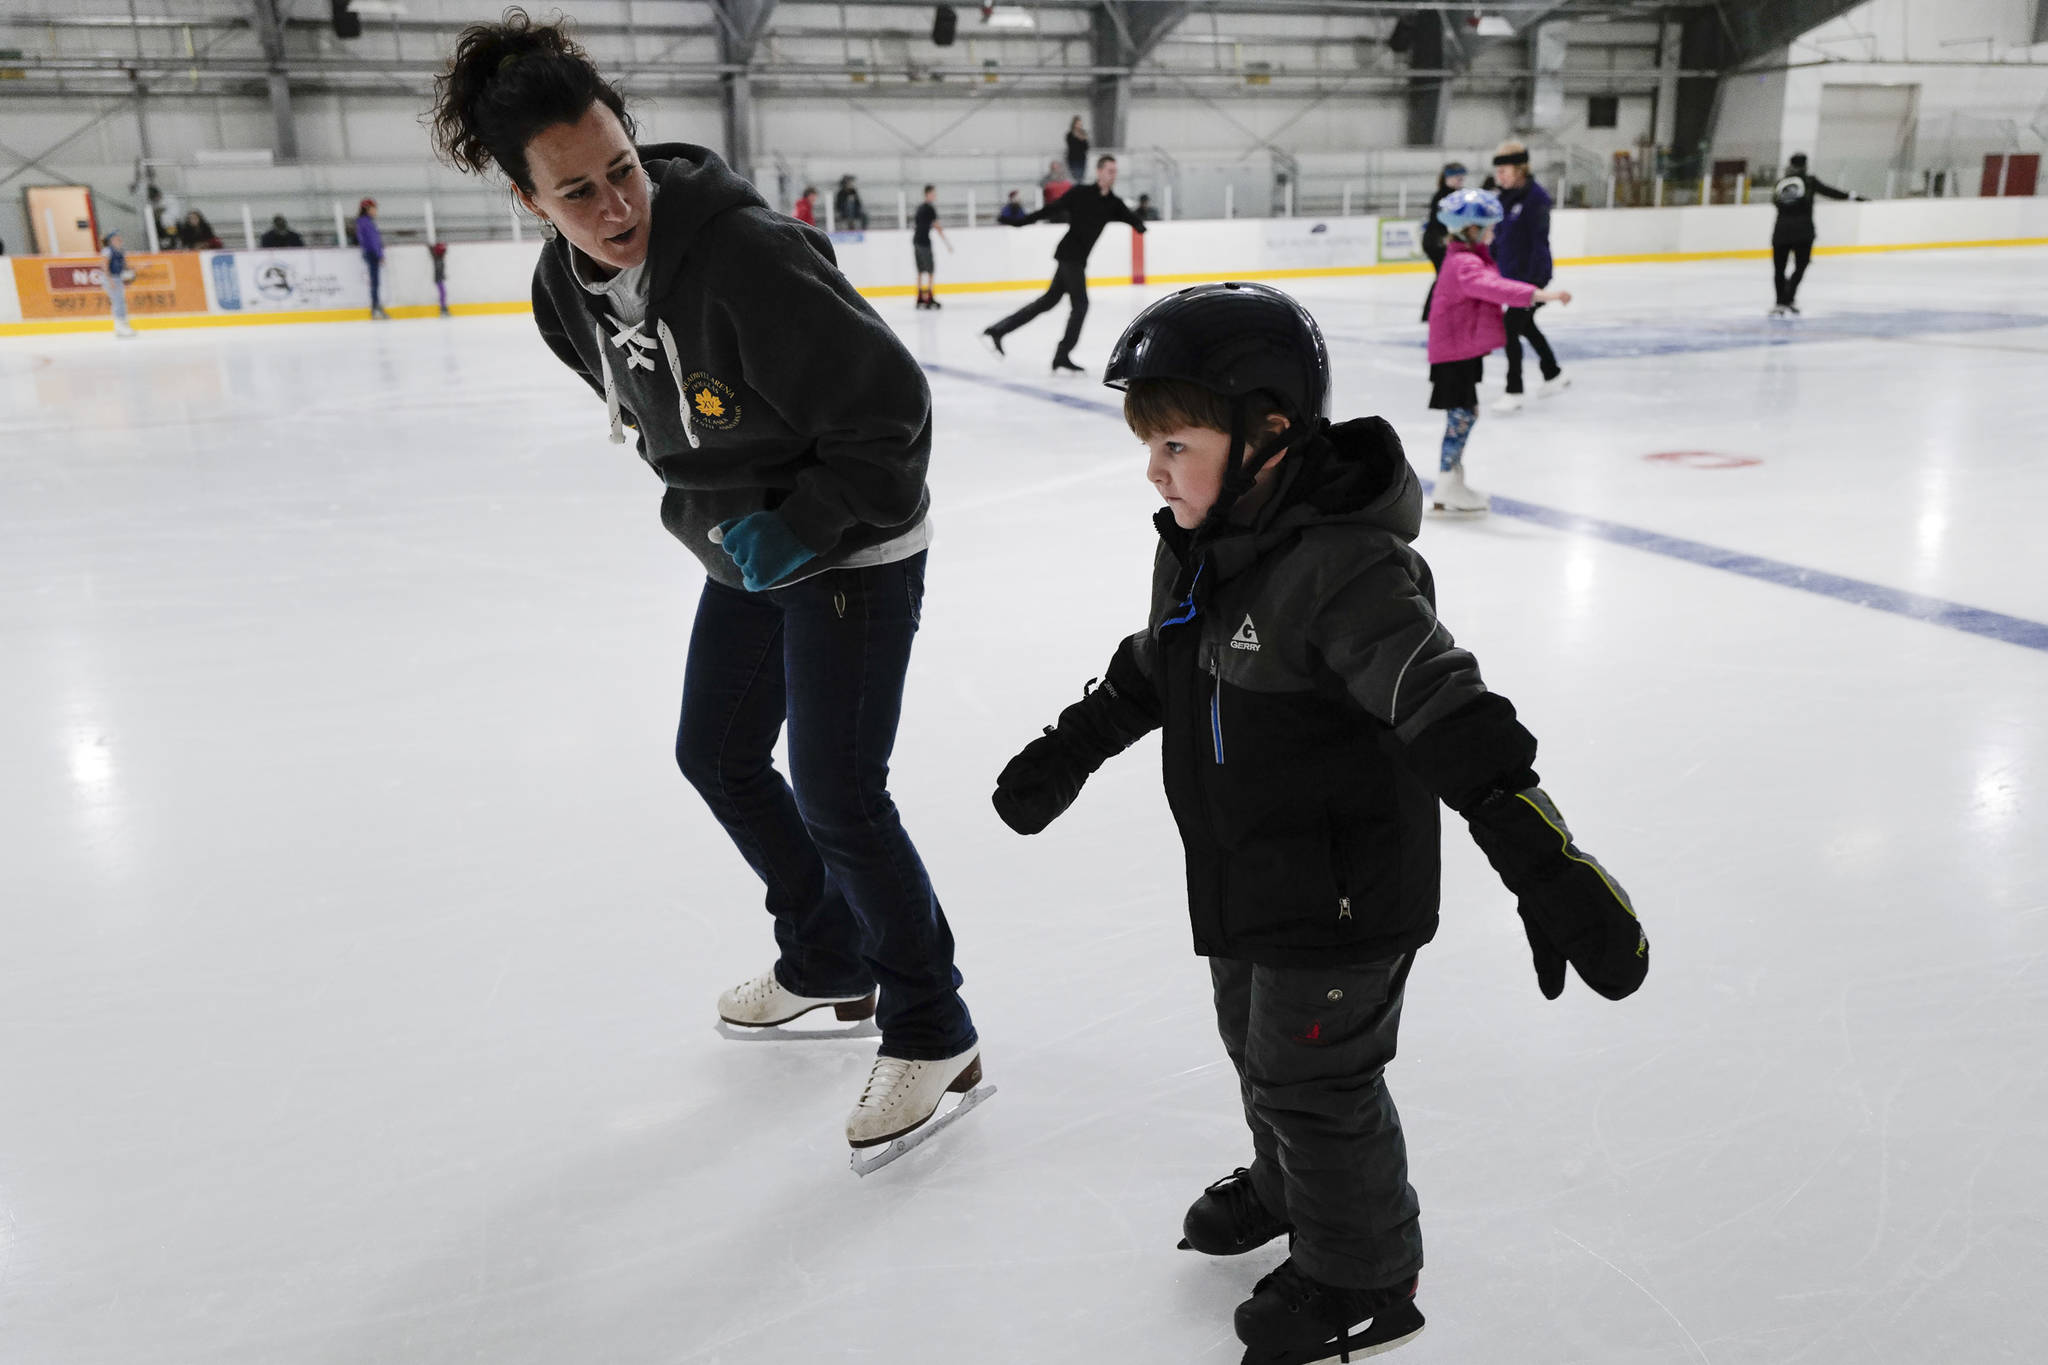 Treadwell Arena Manager Lauren Anderson gives encouragement to Victor DeBartolo, 4, during a free skate on the opening day at the Treadwell Arena on Monday, Aug. 5, 2019. (Michael Penn | Juneau Empire)